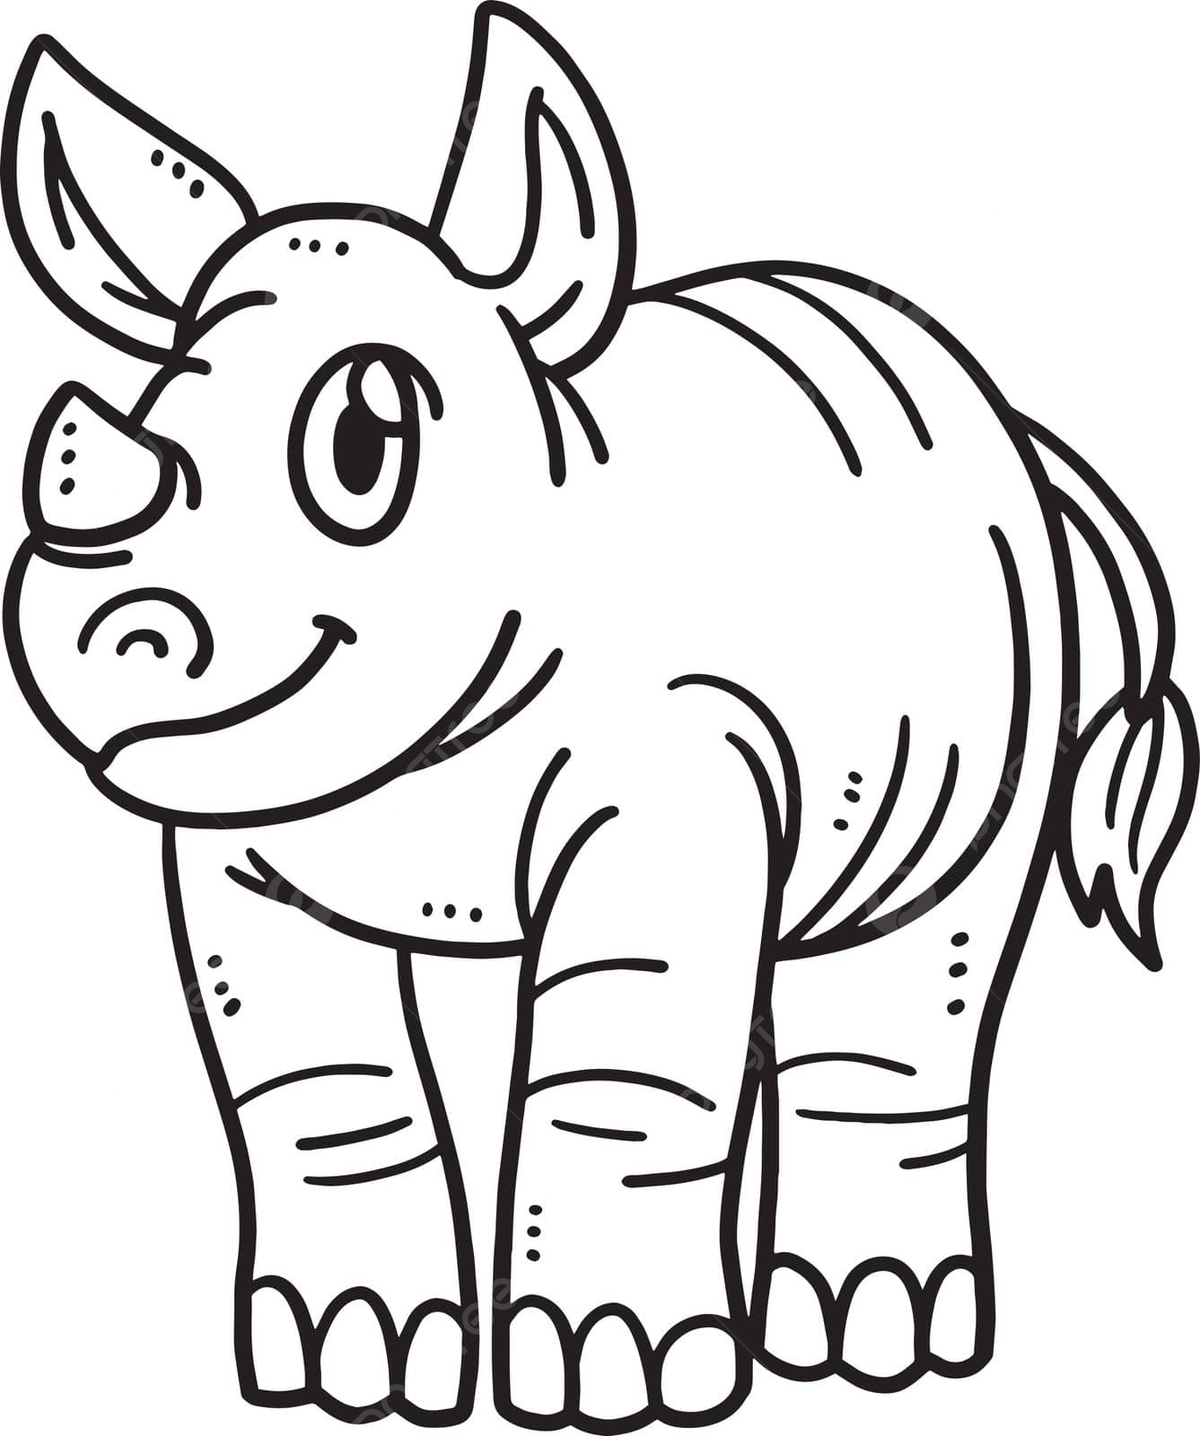 Baby rhino isolated coloring page for kids kids colouring book coloring vector kids colouring book coloring png and vector with transparent background for free download